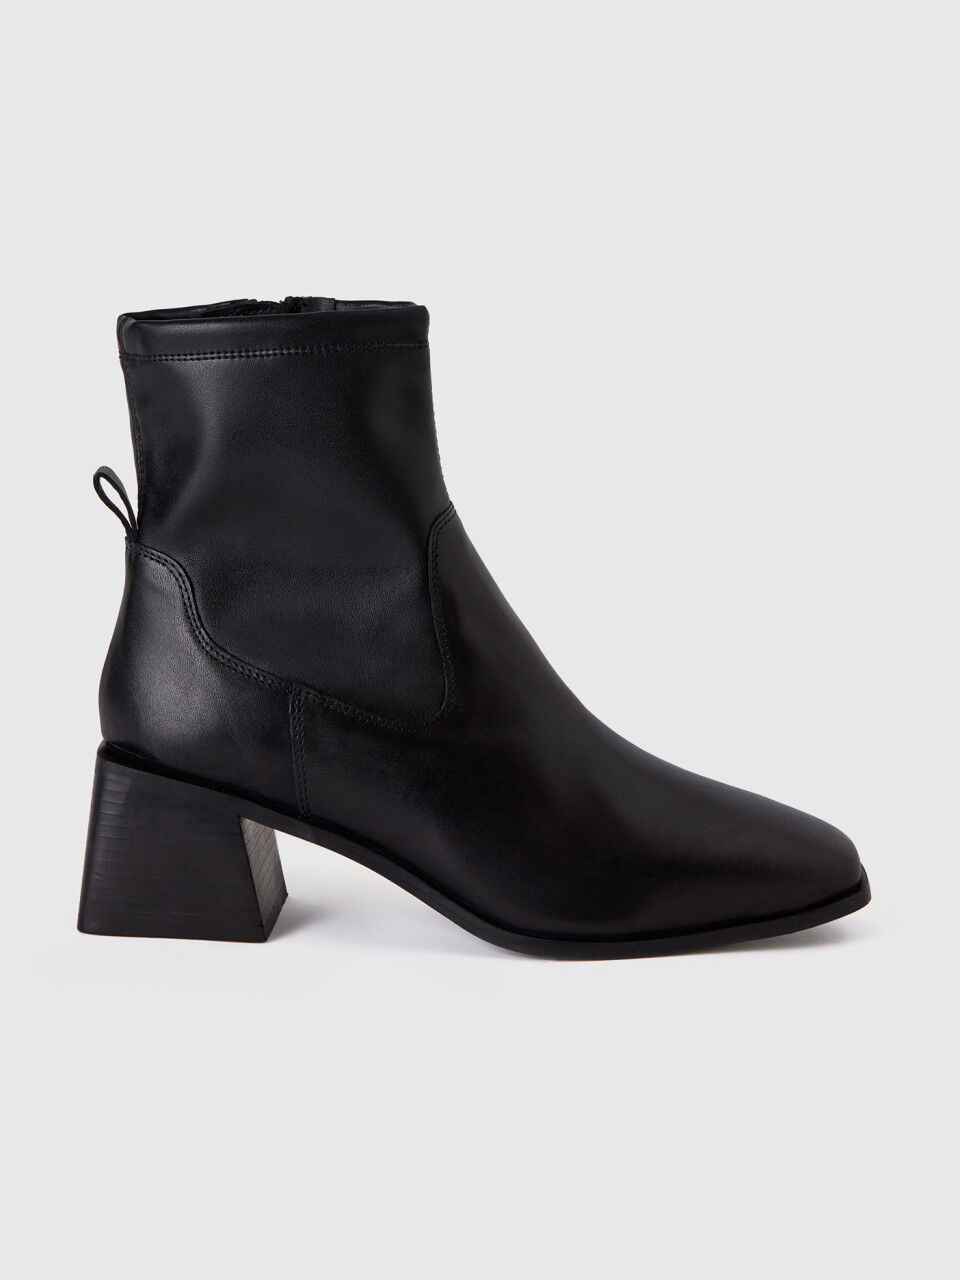 Ankle boots with wide heel